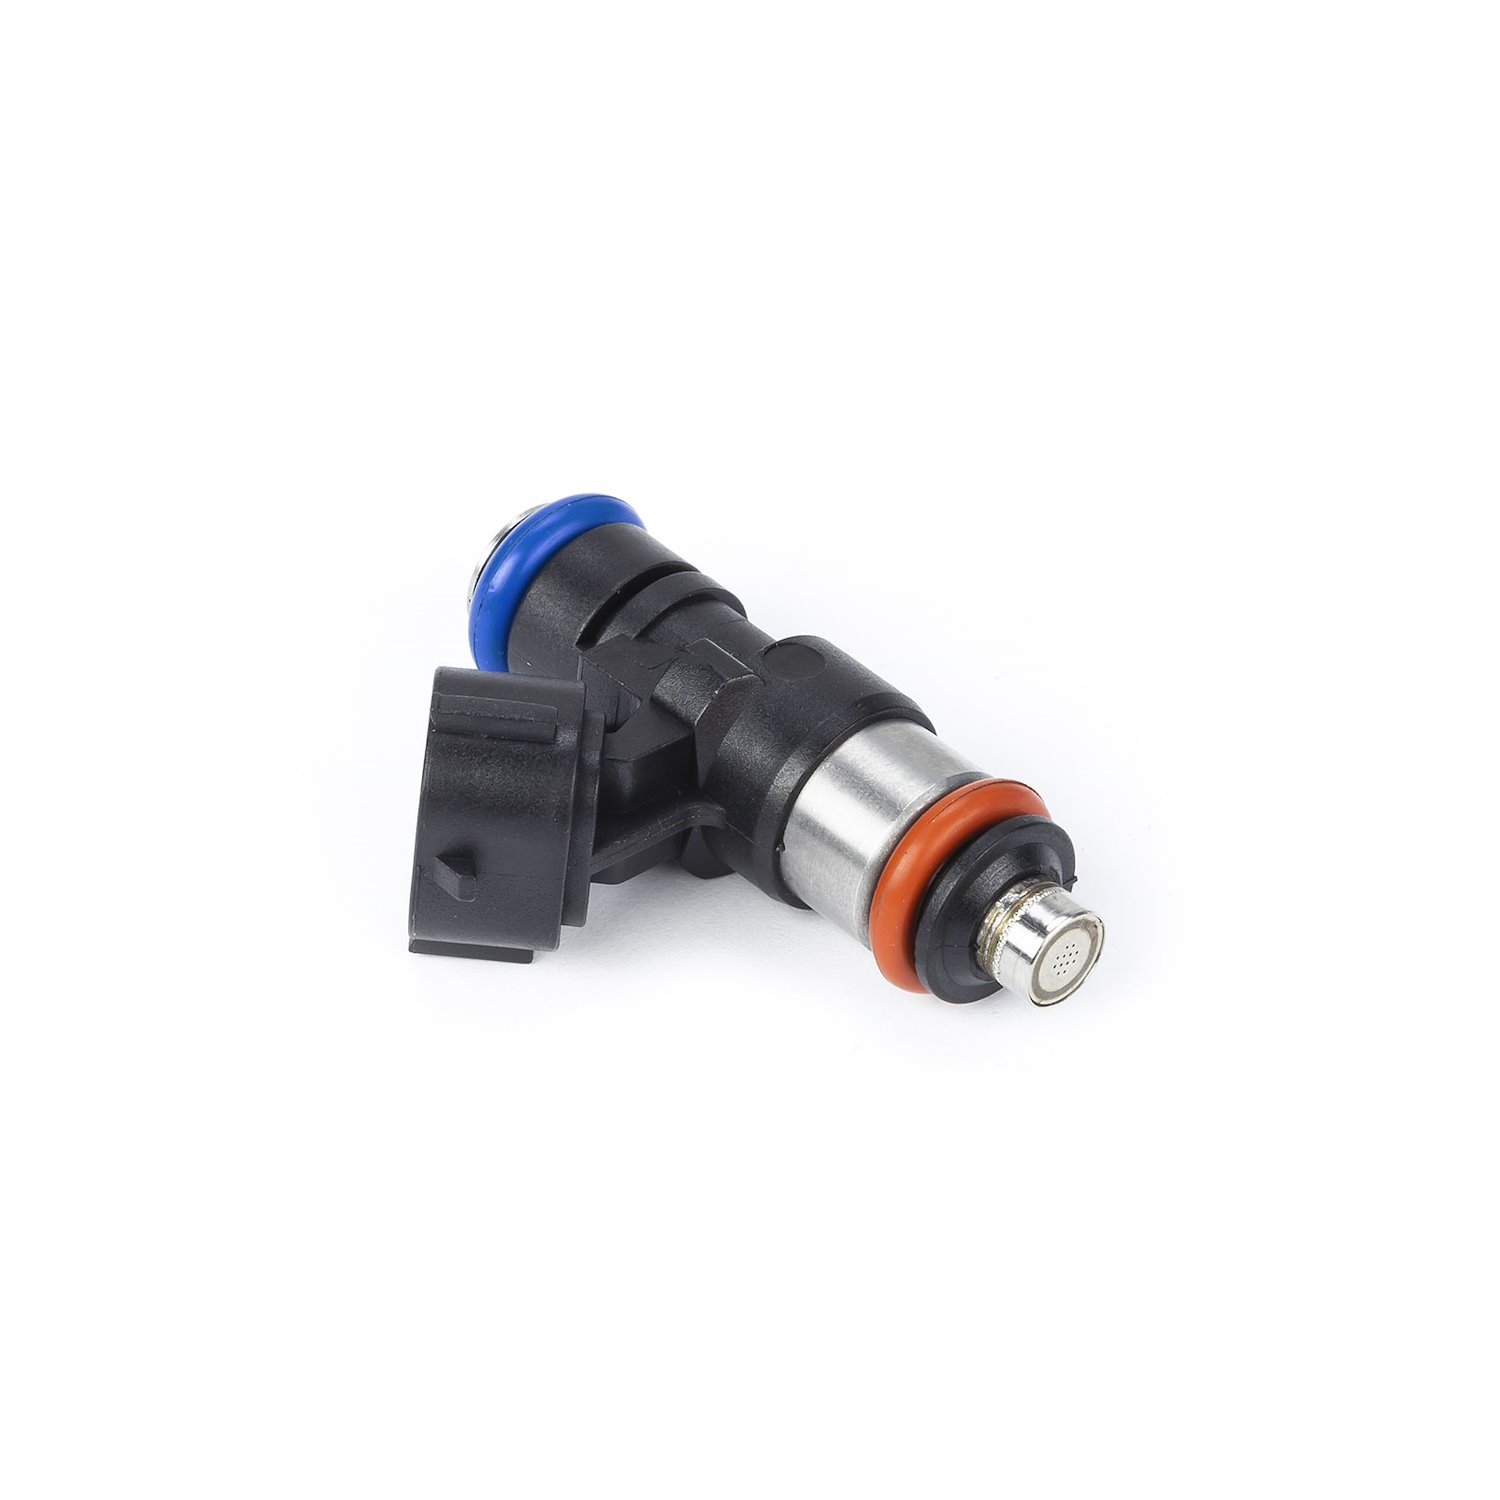 Replacement EV14 Fuel Injector, 38 lbs. Flow Rate